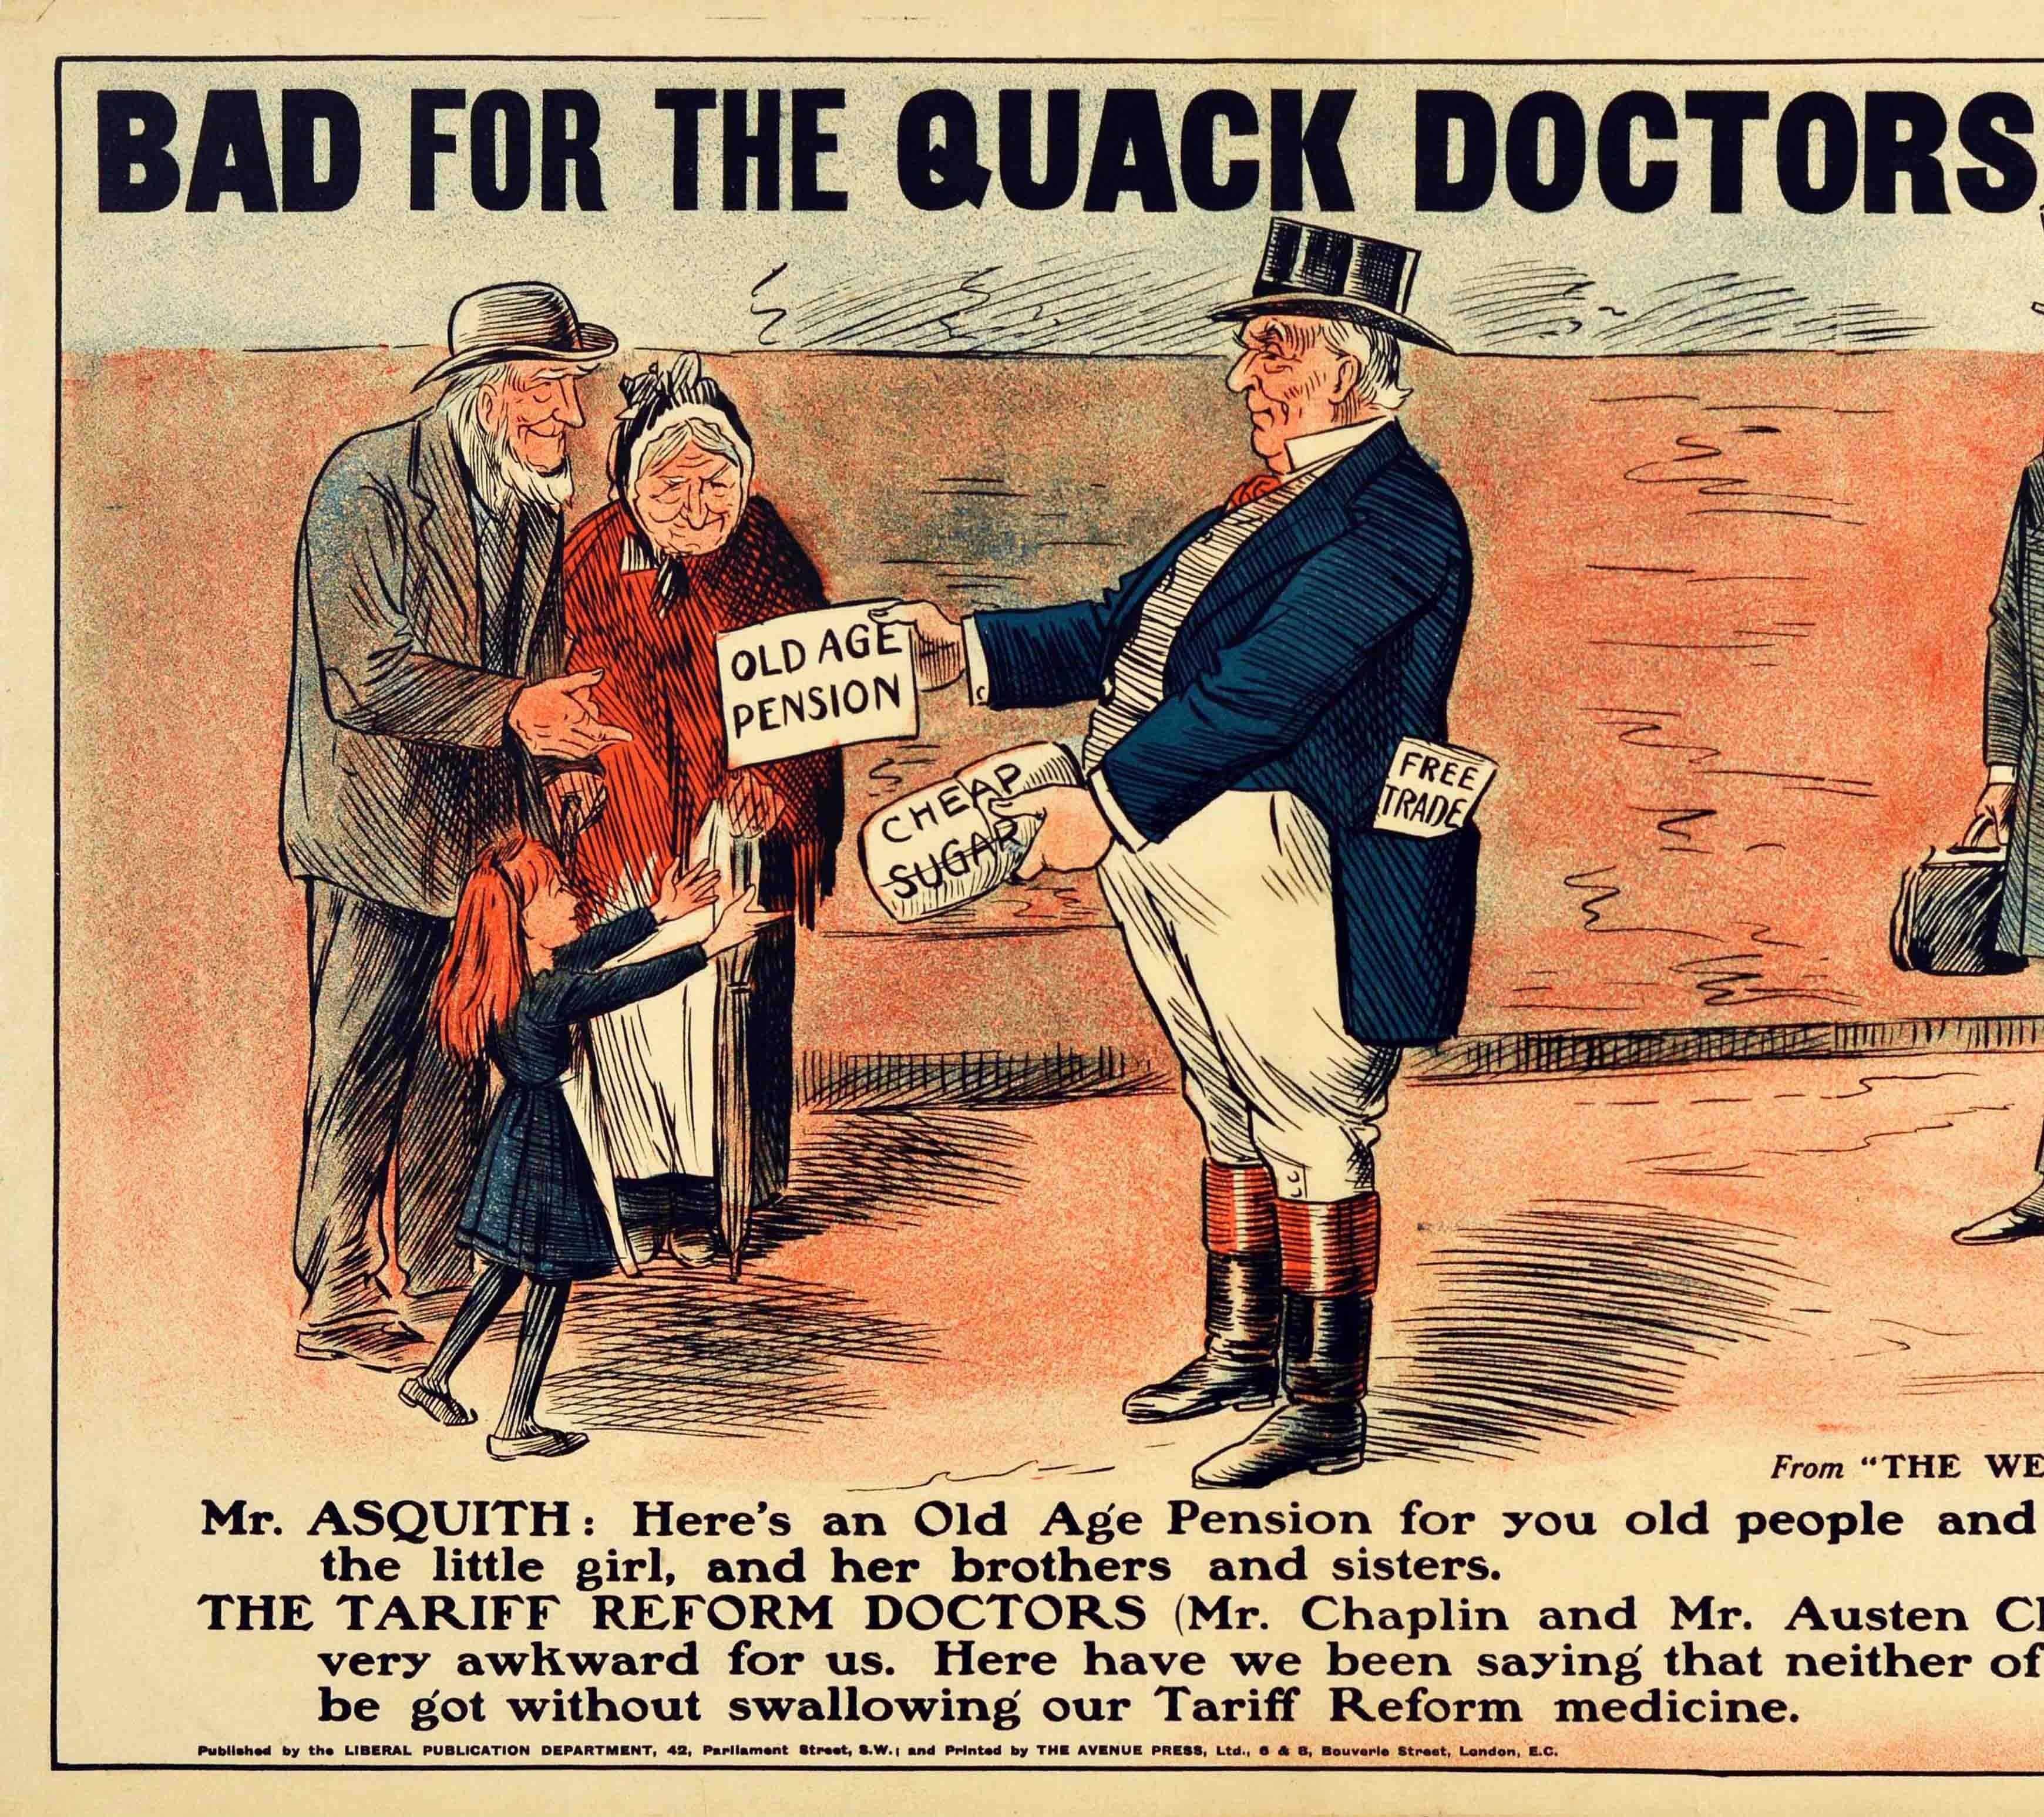 Original antique political election propaganda poster issued by the Liberal Party - Bad For The Quack Doctors - featuring an illustration of the statesman and Liberal politician who served as Prime Minister of the United Kingdom from 1908 to 1916